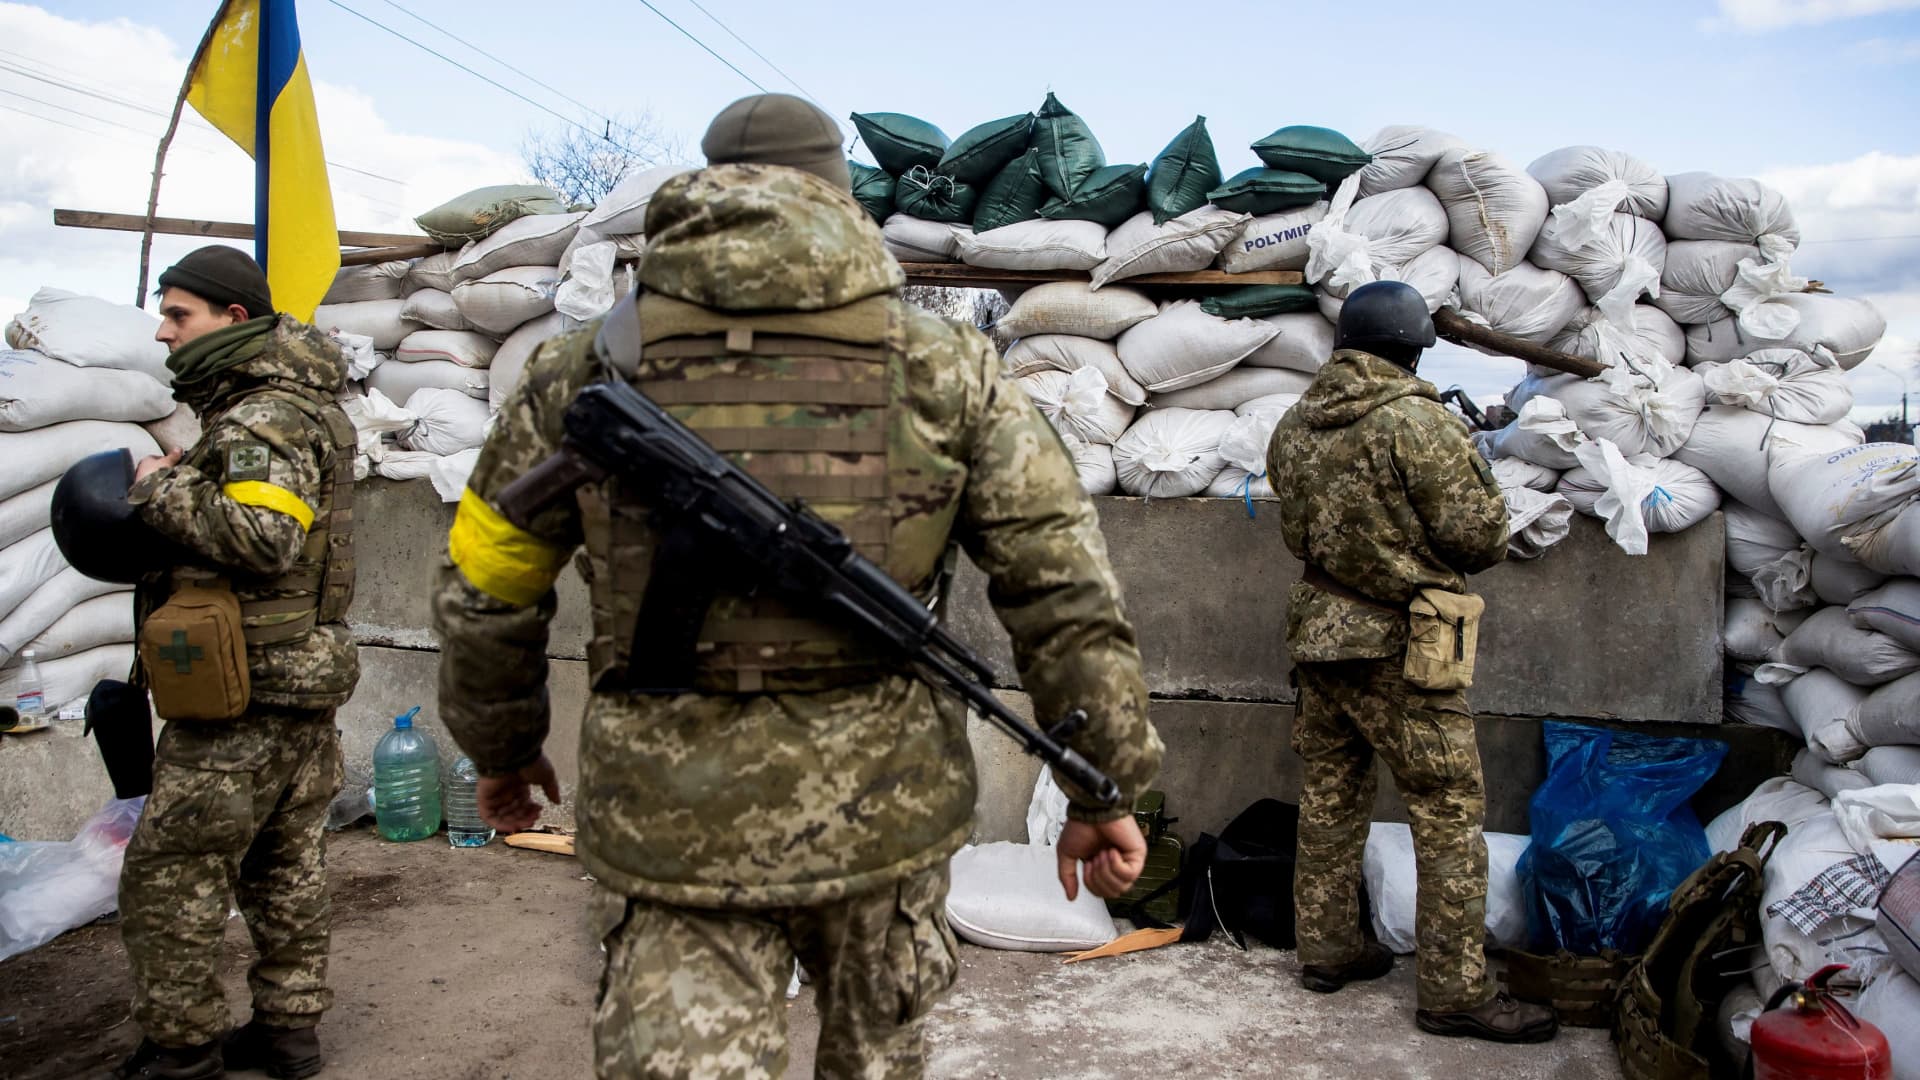 Ukrainian service members are seen, after Russia launched a massive military operation against Ukraine, at a check point in the city of Zhytomyr, Ukraine February 27, 2022.